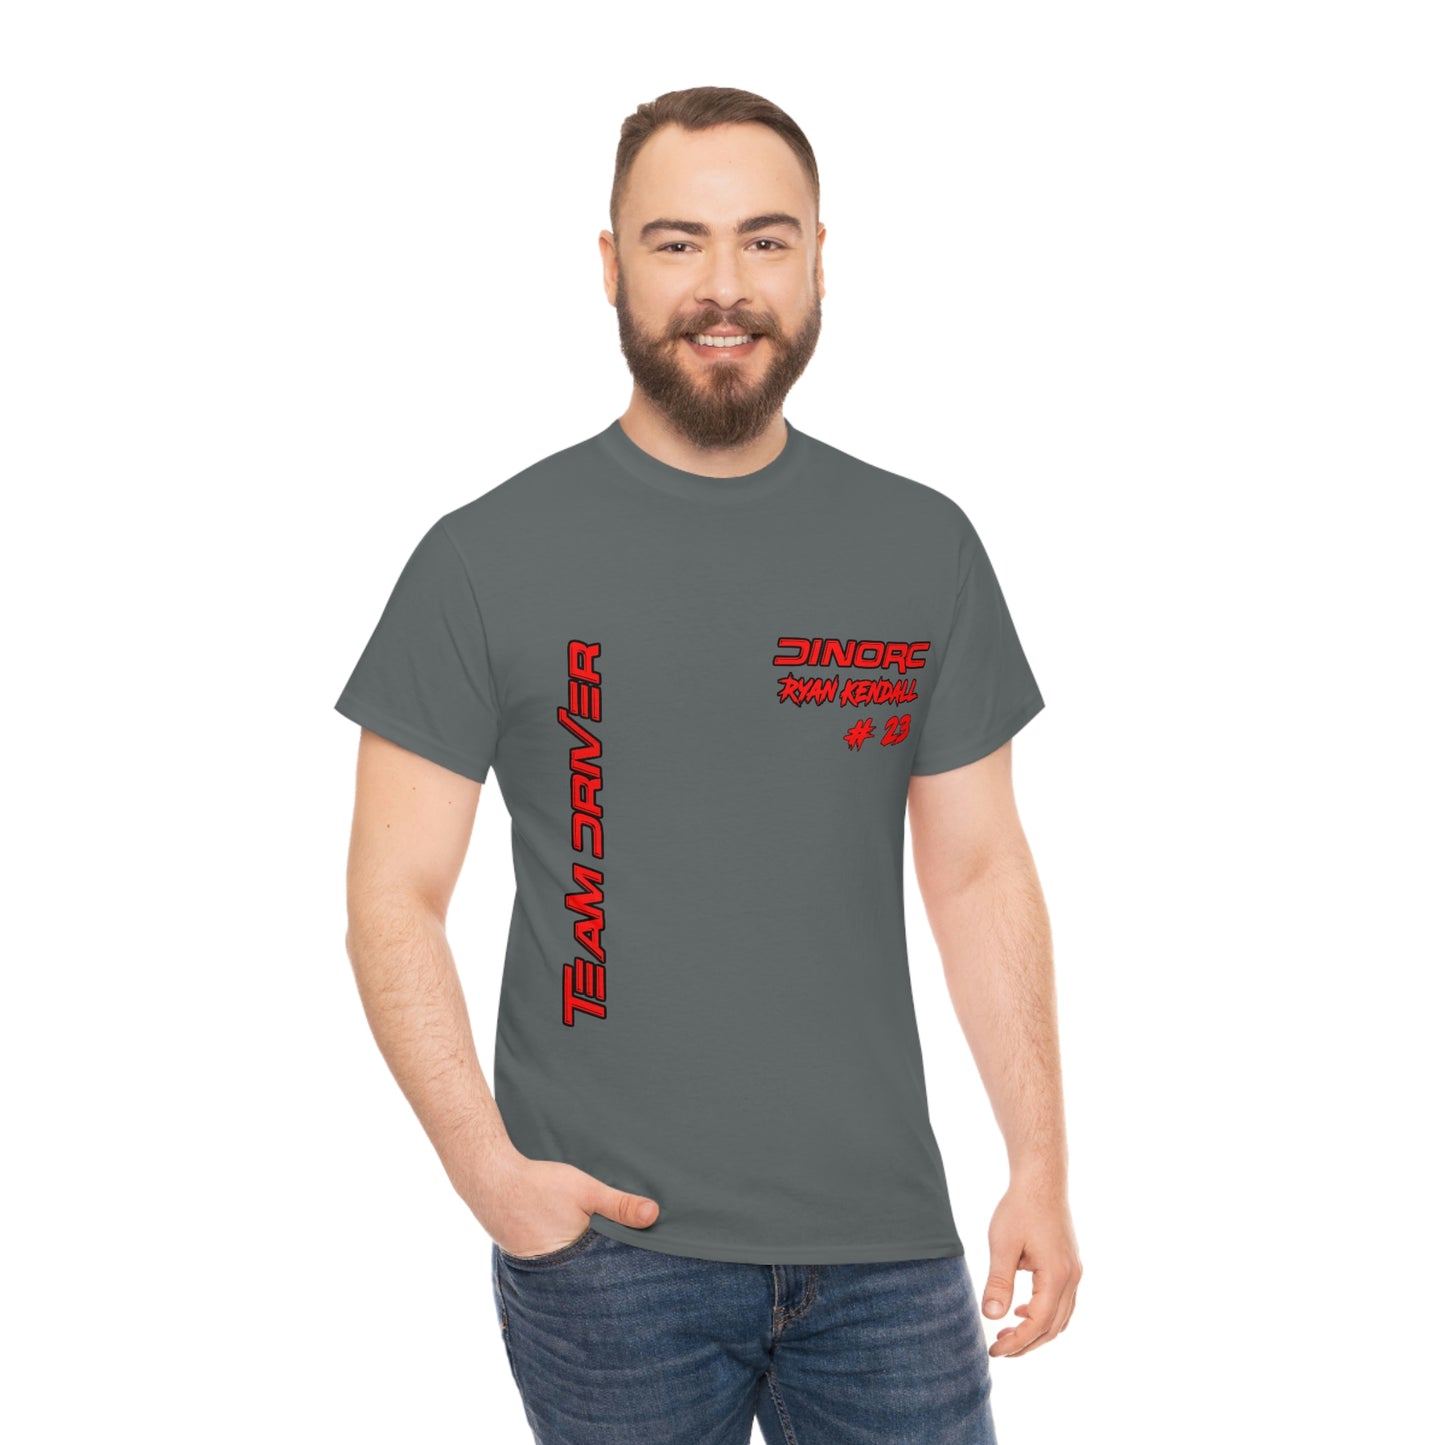 Team Driver Ryan Kendall Front and Back DinoRc Logo T-Shirt S-5x 5 colors